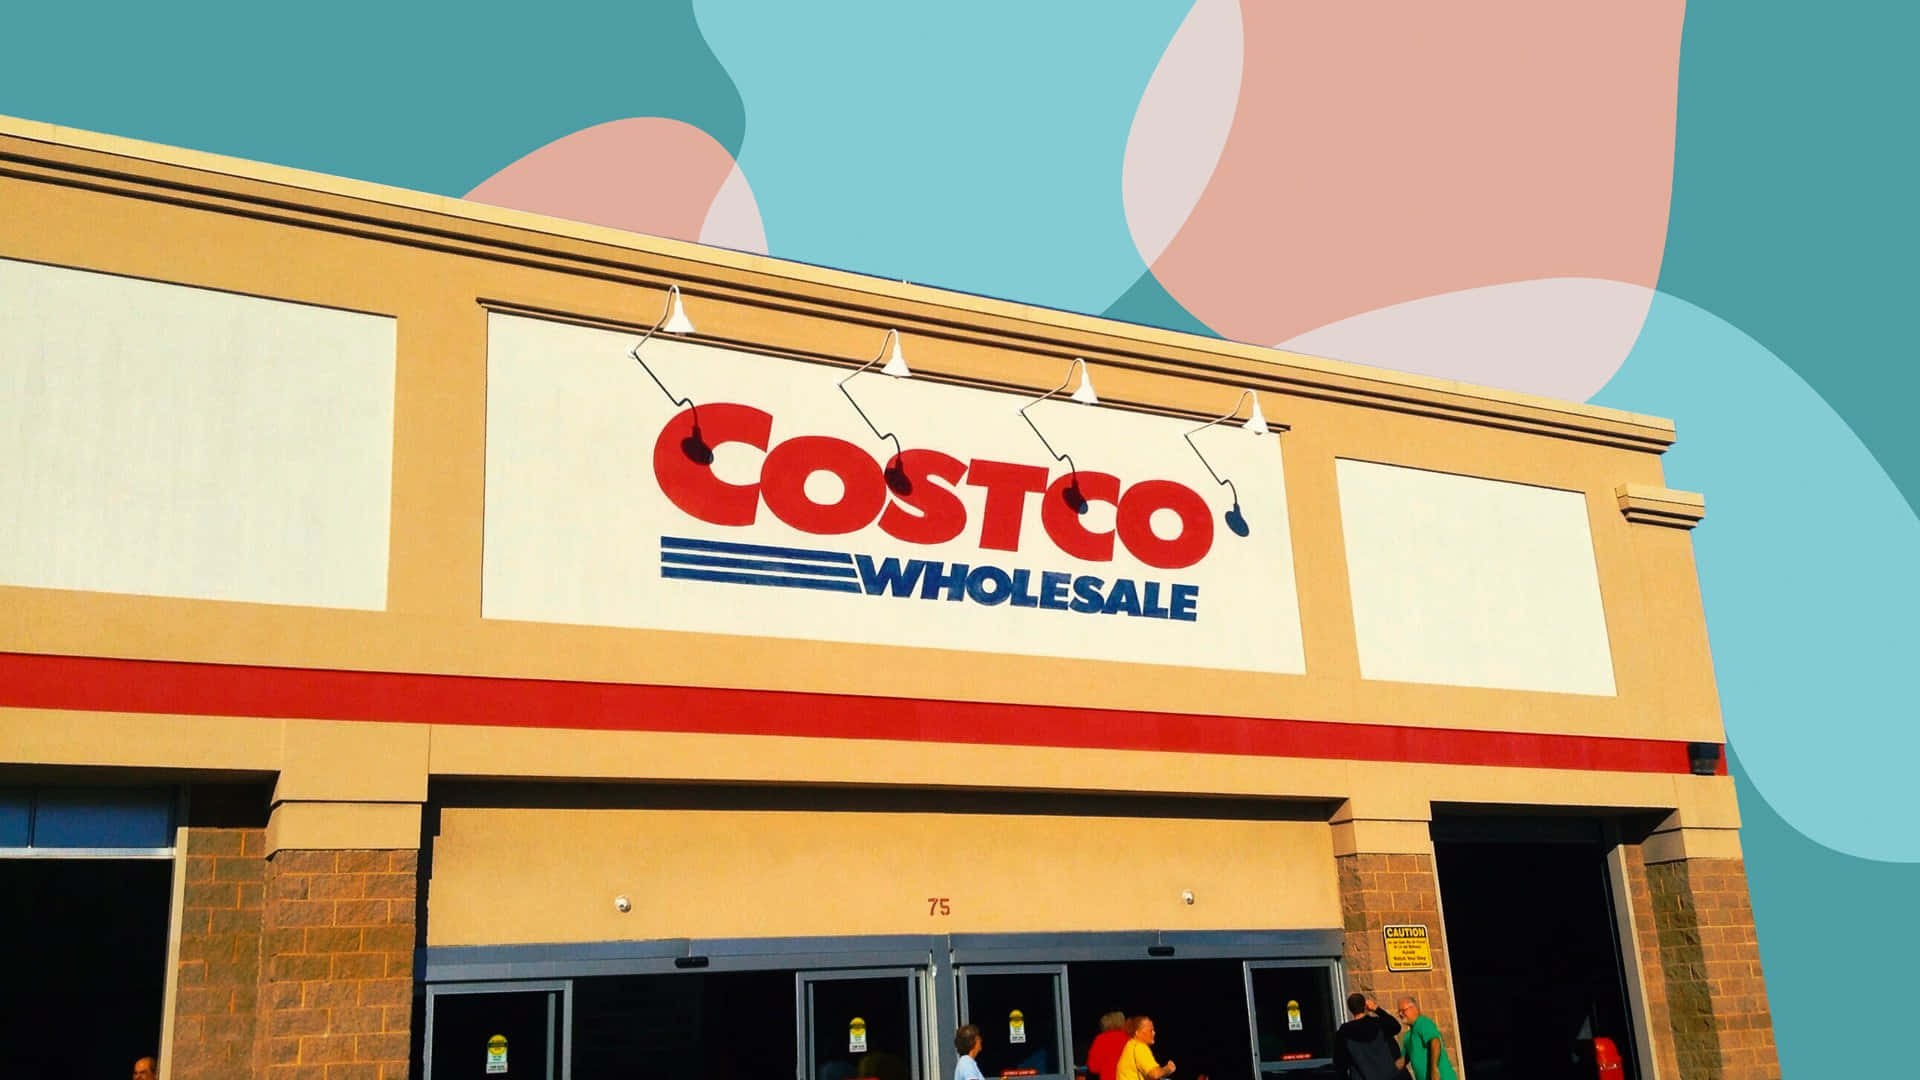 Costco Wholesale Is A Large Store With A Sign